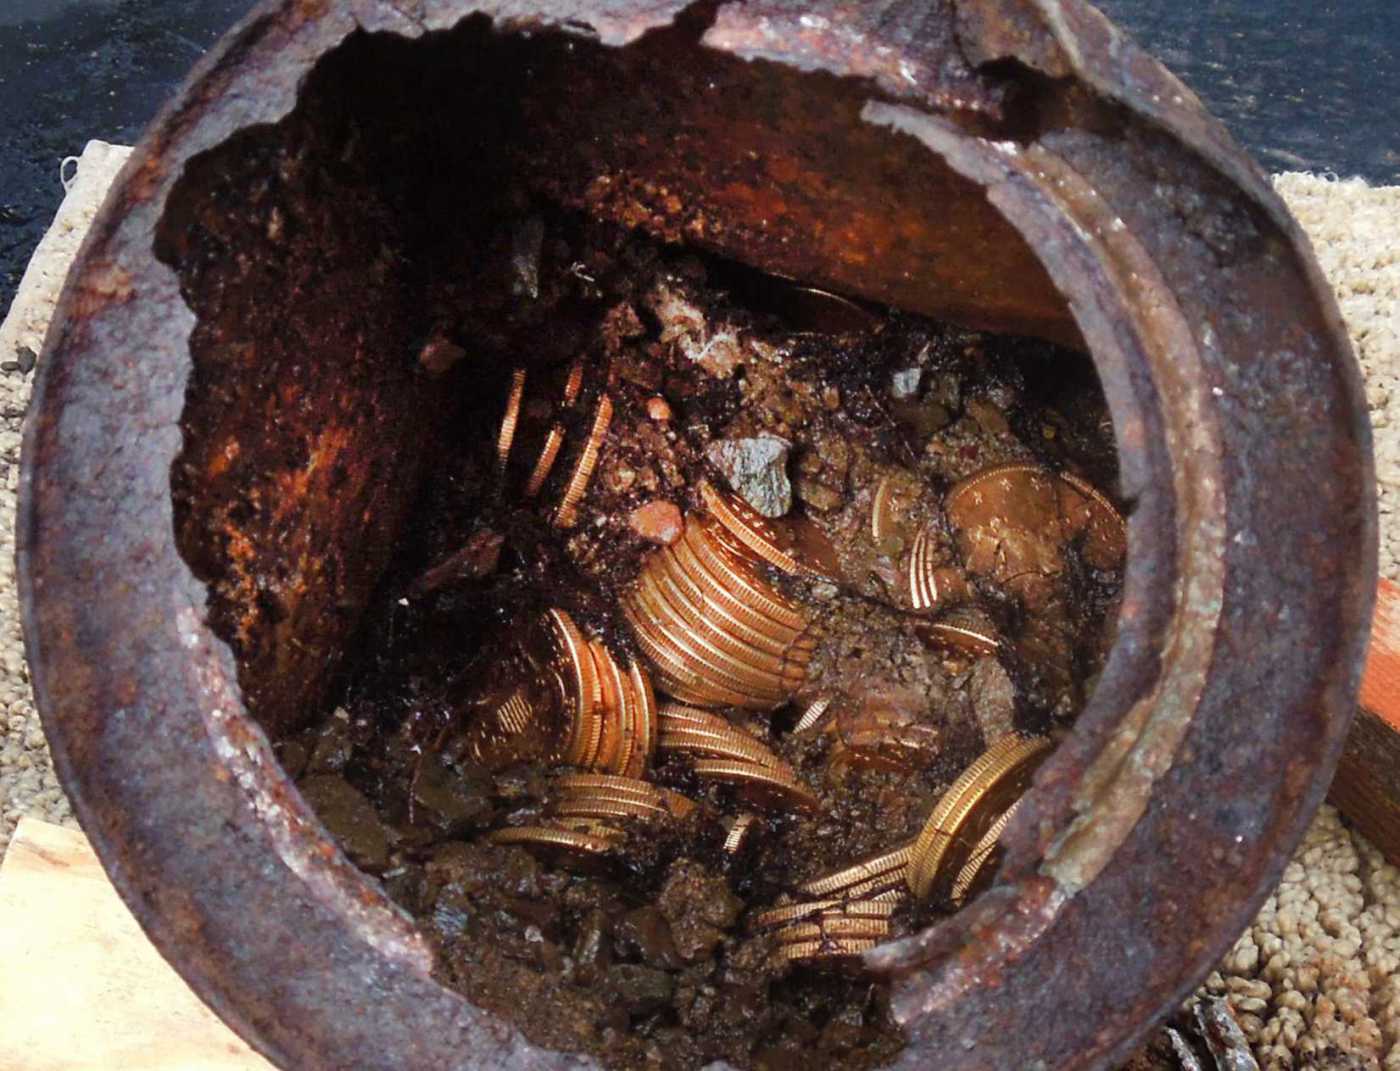 This image provided by the Saddle Ridge Hoard discoverers via Kagin's, Inc., shows one of the six decaying metal canisters filled with 1800s-era U.S. gold coins unearthed in California by two people who want to remain anonymous. (Saddle Ridge Hoard discoverers—Kagin's, Inc./AP Photo)